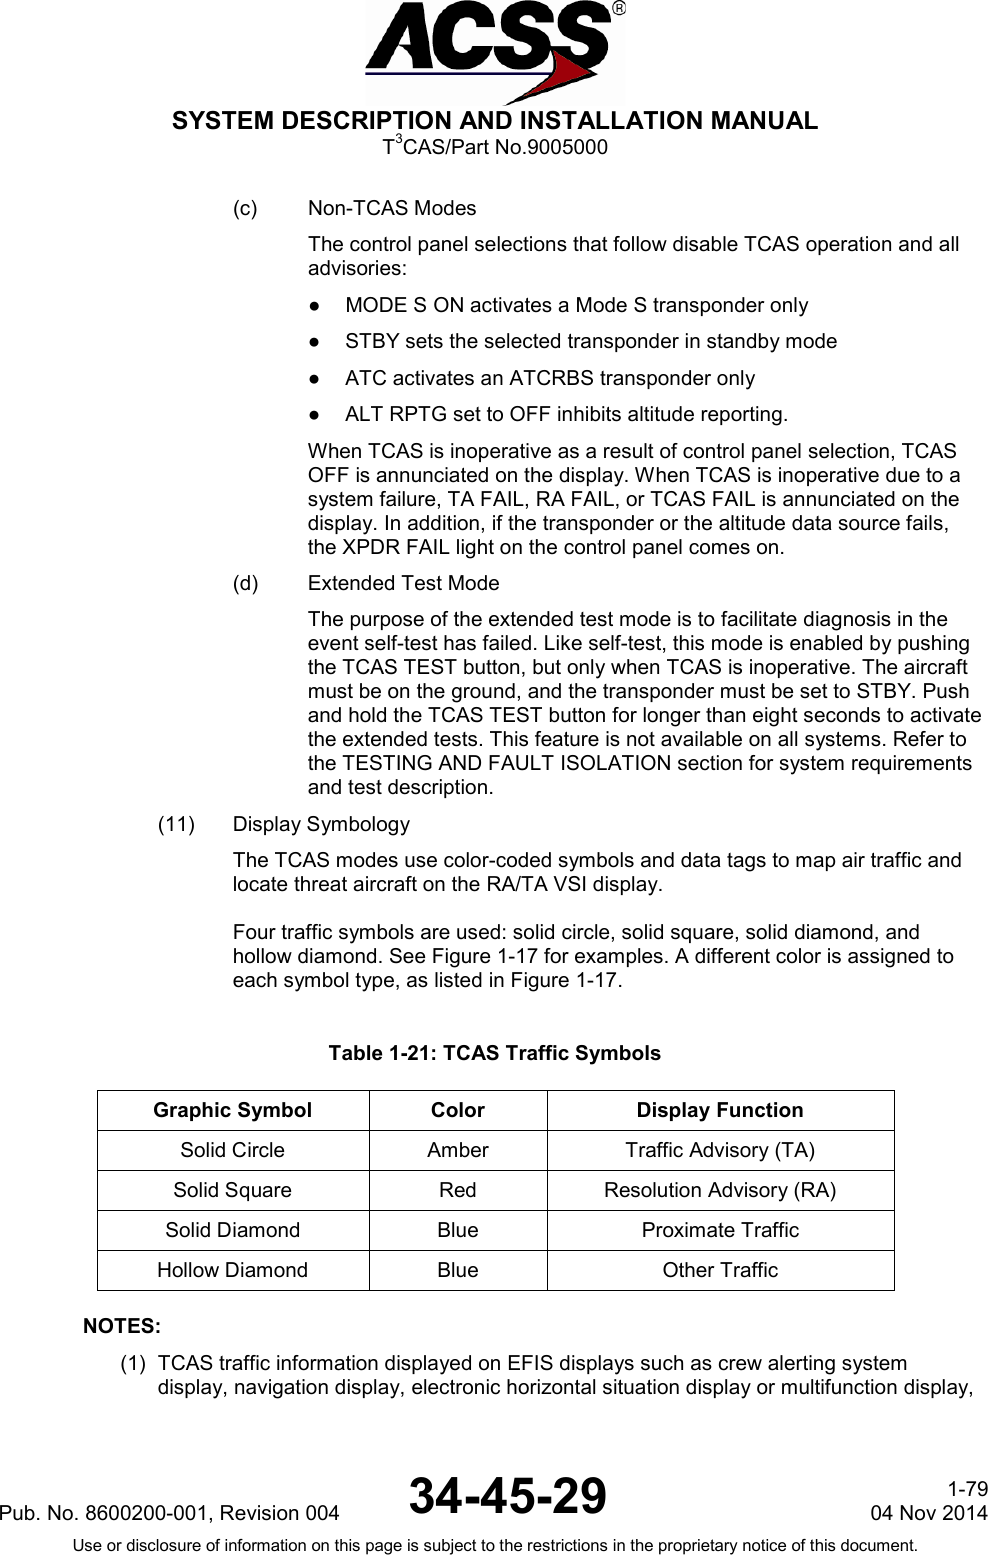  SYSTEM DESCRIPTION AND INSTALLATION MANUAL T3CAS/Part No.9005000 (c) Non-TCAS Modes The control panel selections that follow disable TCAS operation and all advisories: ●  MODE S ON activates a Mode S transponder only ●  STBY sets the selected transponder in standby mode ●  ATC activates an ATCRBS transponder only ●  ALT RPTG set to OFF inhibits altitude reporting. When TCAS is inoperative as a result of control panel selection, TCAS OFF is annunciated on the display. When TCAS is inoperative due to a system failure, TA FAIL, RA FAIL, or TCAS FAIL is annunciated on the display. In addition, if the transponder or the altitude data source fails, the XPDR FAIL light on the control panel comes on. (d) Extended Test Mode The purpose of the extended test mode is to facilitate diagnosis in the event self-test has failed. Like self-test, this mode is enabled by pushing the TCAS TEST button, but only when TCAS is inoperative. The aircraft must be on the ground, and the transponder must be set to STBY. Push and hold the TCAS TEST button for longer than eight seconds to activate the extended tests. This feature is not available on all systems. Refer to the TESTING AND FAULT ISOLATION section for system requirements and test description. (11) Display Symbology The TCAS modes use color-coded symbols and data tags to map air traffic and locate threat aircraft on the RA/TA VSI display.  Four traffic symbols are used: solid circle, solid square, solid diamond, and hollow diamond. See Figure 1-17 for examples. A different color is assigned to each symbol type, as listed in Figure 1-17.  Table 1-21: TCAS Traffic Symbols Graphic Symbol Color Display Function Solid Circle Amber Traffic Advisory (TA) Solid Square Red Resolution Advisory (RA) Solid Diamond Blue Proximate Traffic Hollow Diamond Blue Other Traffic  NOTES: (1) TCAS traffic information displayed on EFIS displays such as crew alerting system display, navigation display, electronic horizontal situation display or multifunction display, Pub. No. 8600200-001, Revision 004 34-45-29 1-79 04 Nov 2014 Use or disclosure of information on this page is subject to the restrictions in the proprietary notice of this document.  